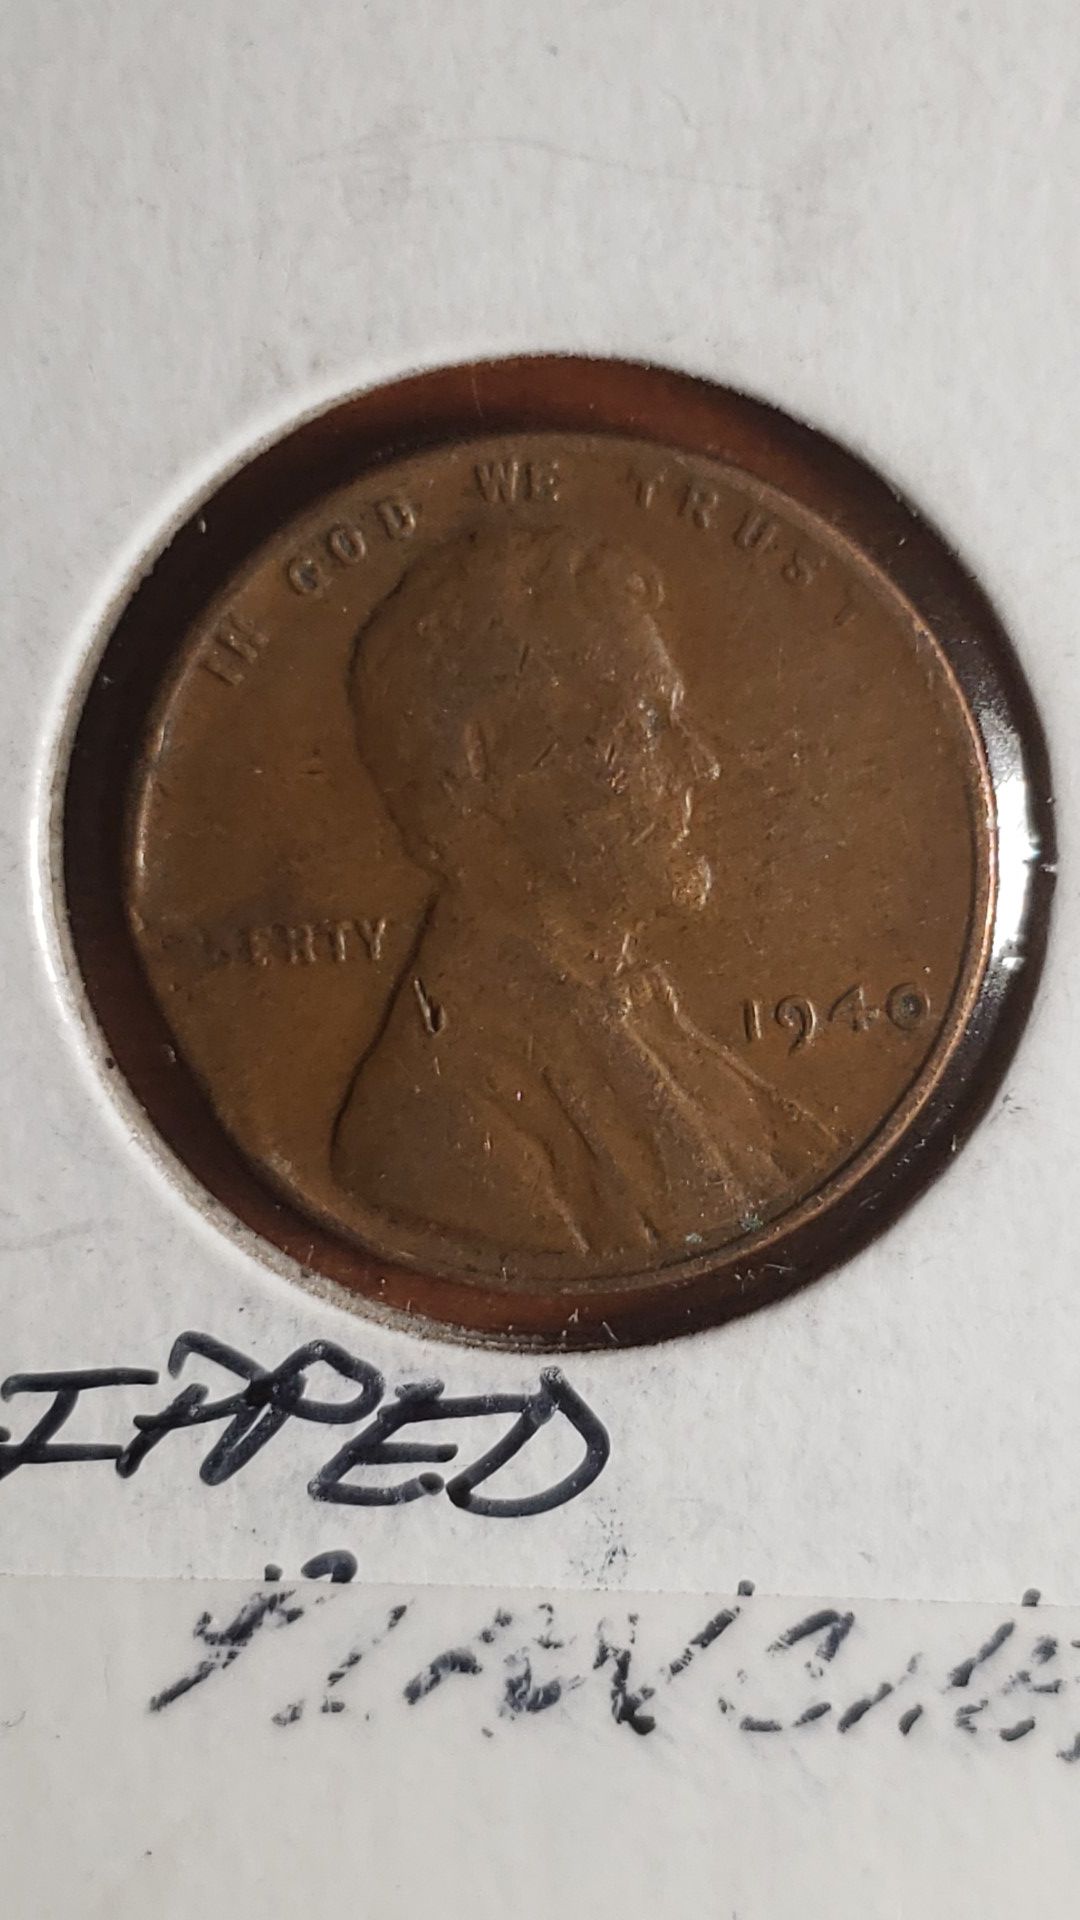 1940 P Lincoln penny with Clipped Planchet